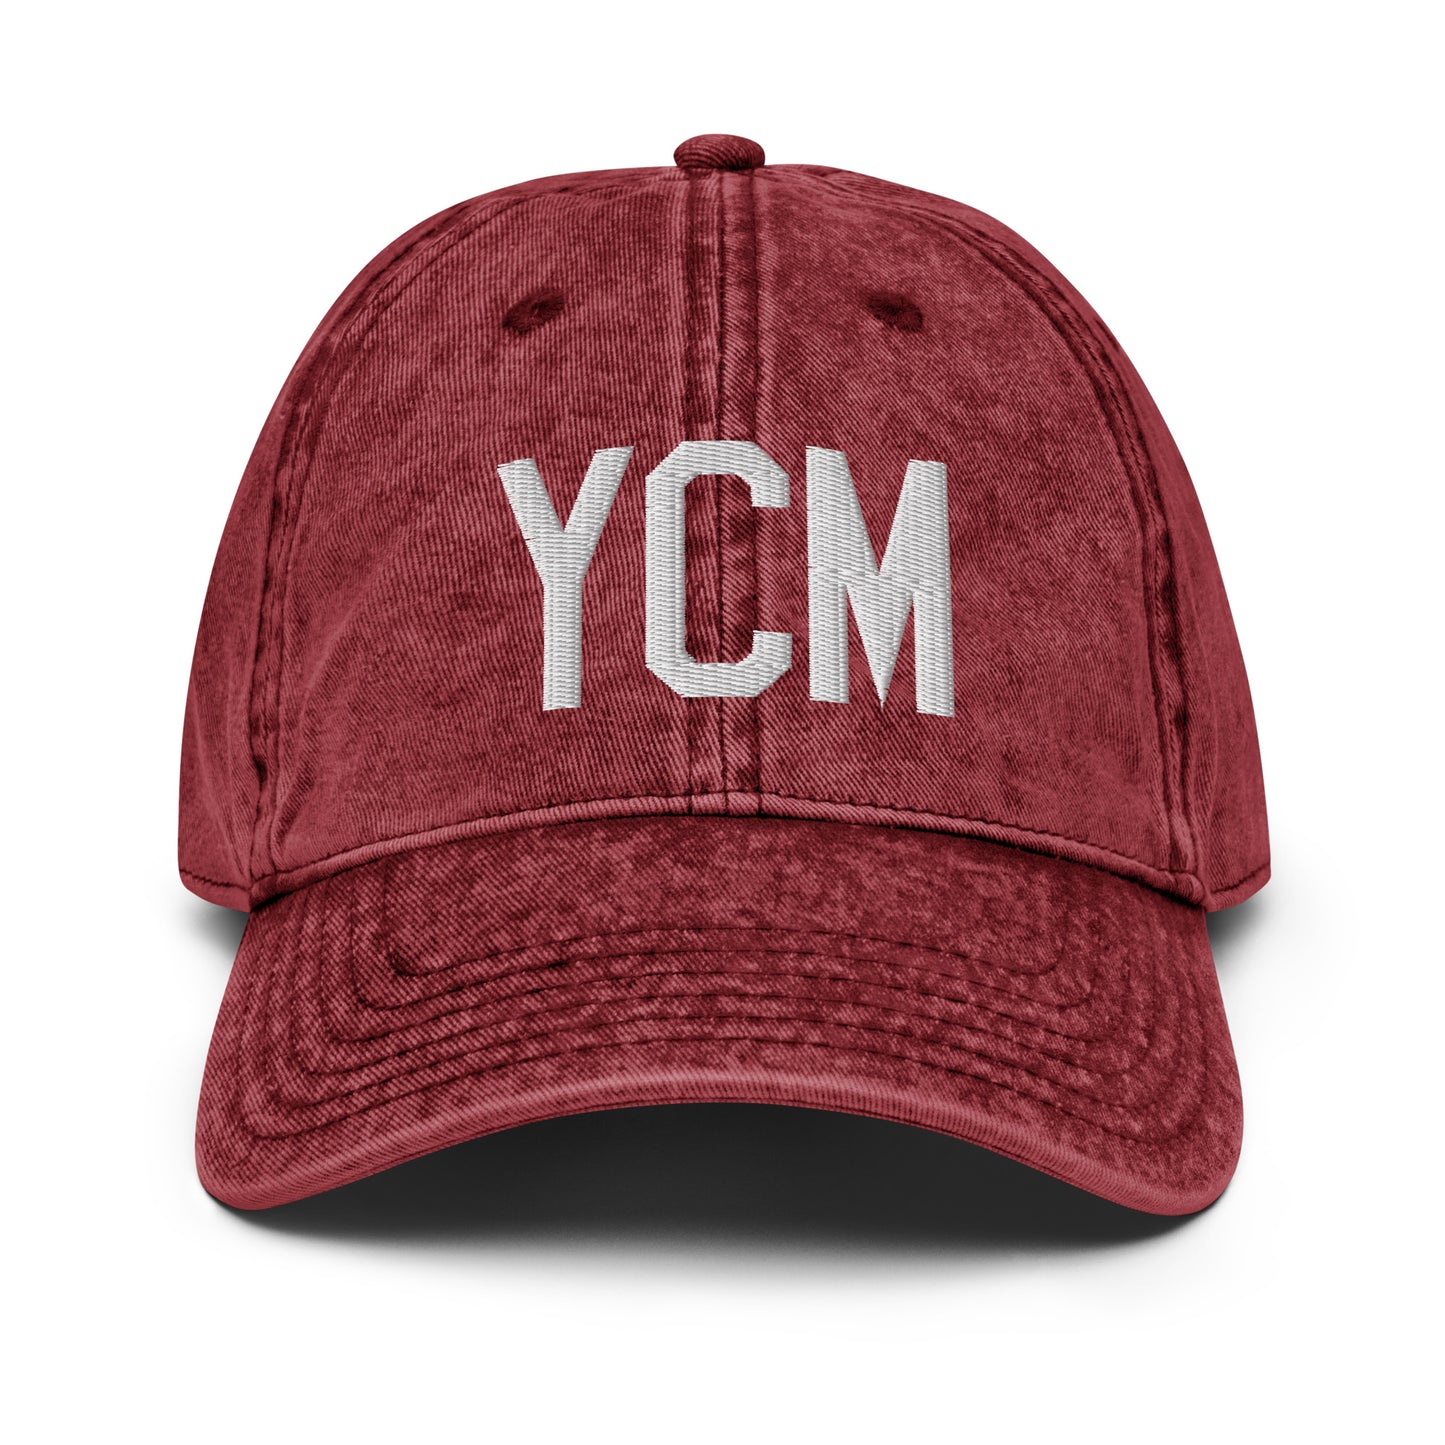 Airport Code Twill Cap - White • YCM St. Catharines • YHM Designs - Image 19